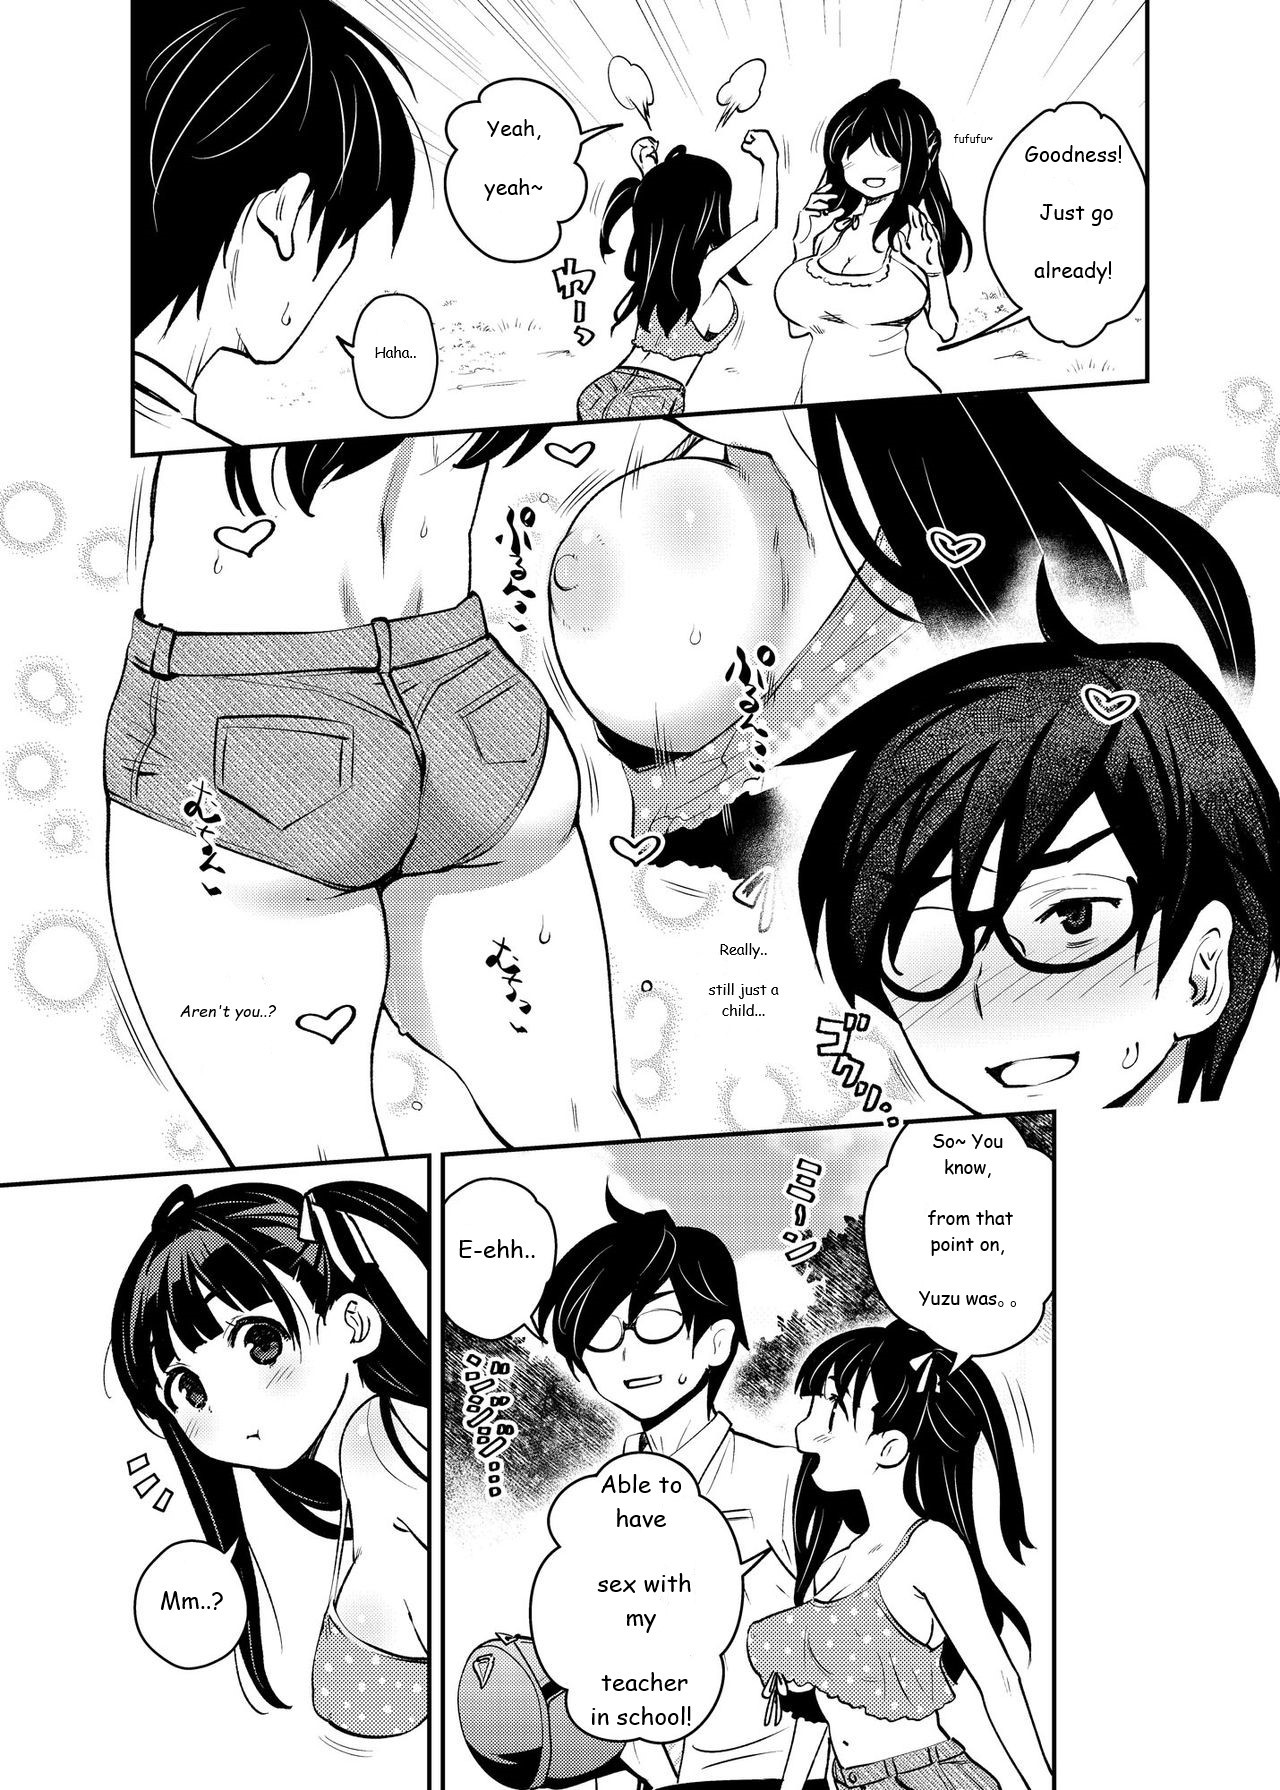 Hentai Manga Comic-Countryside Sex 5! A Lewd Story About Making Love From Night Until Morning-Read-3